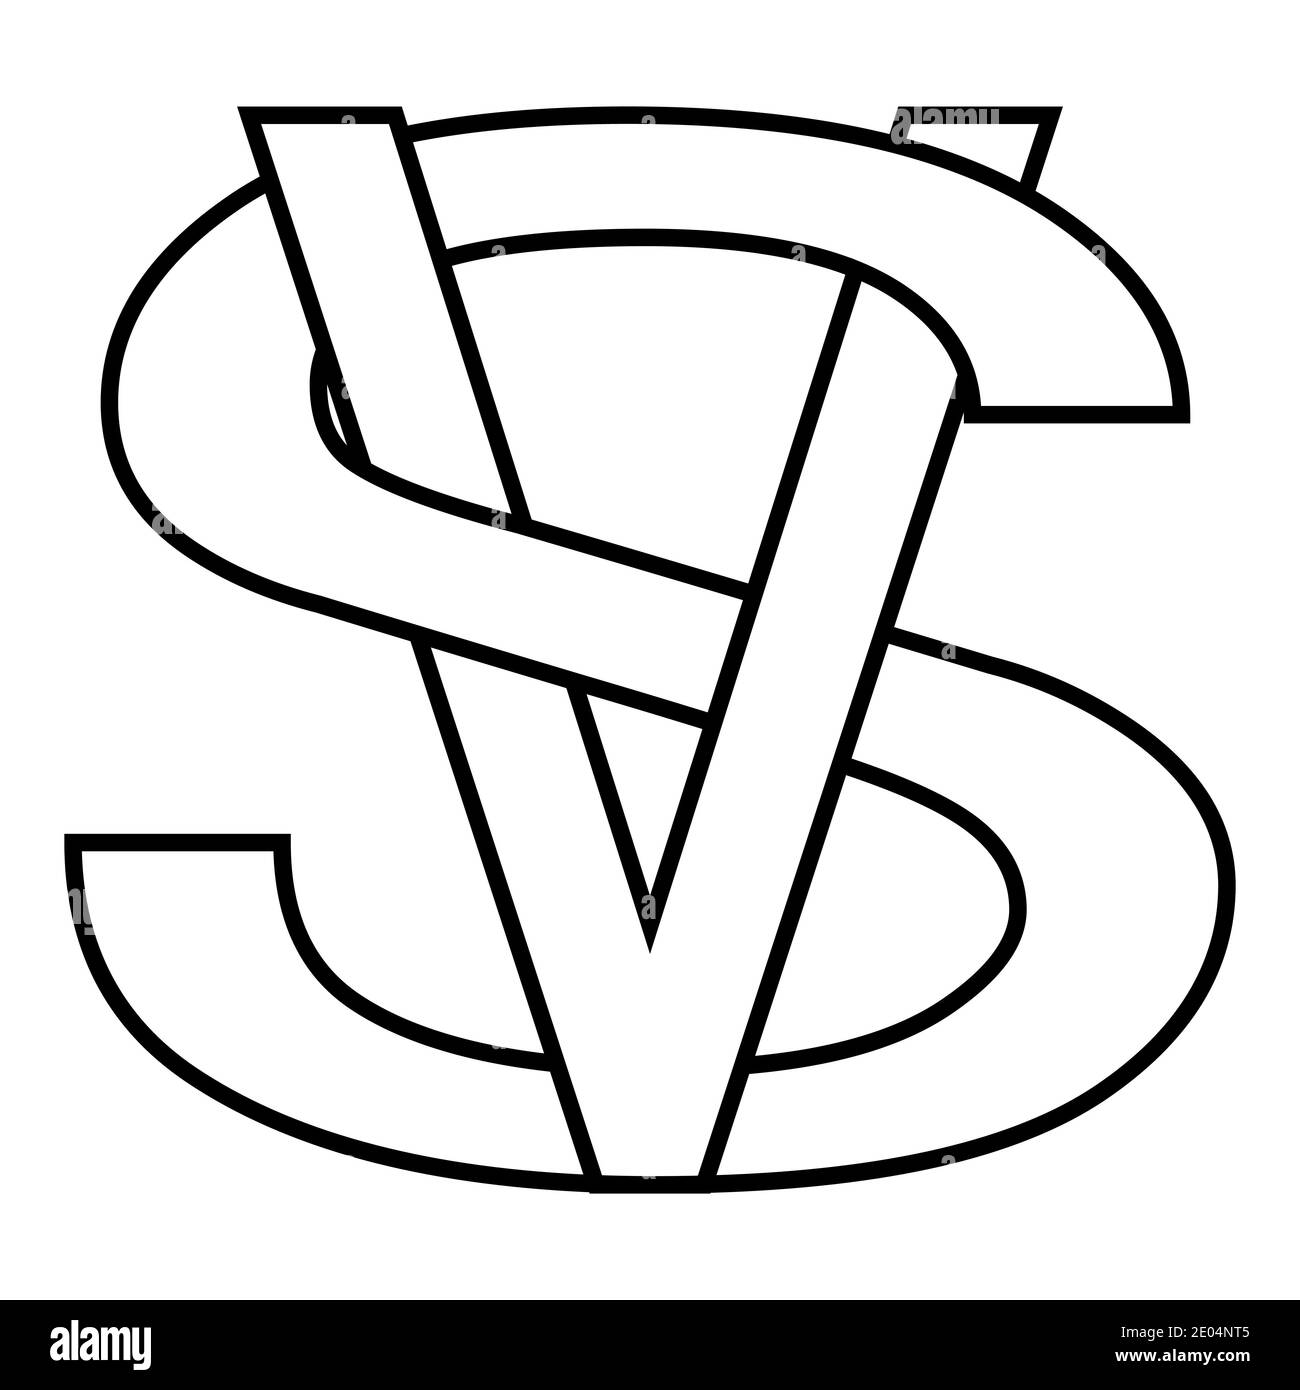 Letters intertwined V and S vs versus logo, vector logo VS letters for sports, fight, competition, versus battle, match, v and s letters game Stock Vector